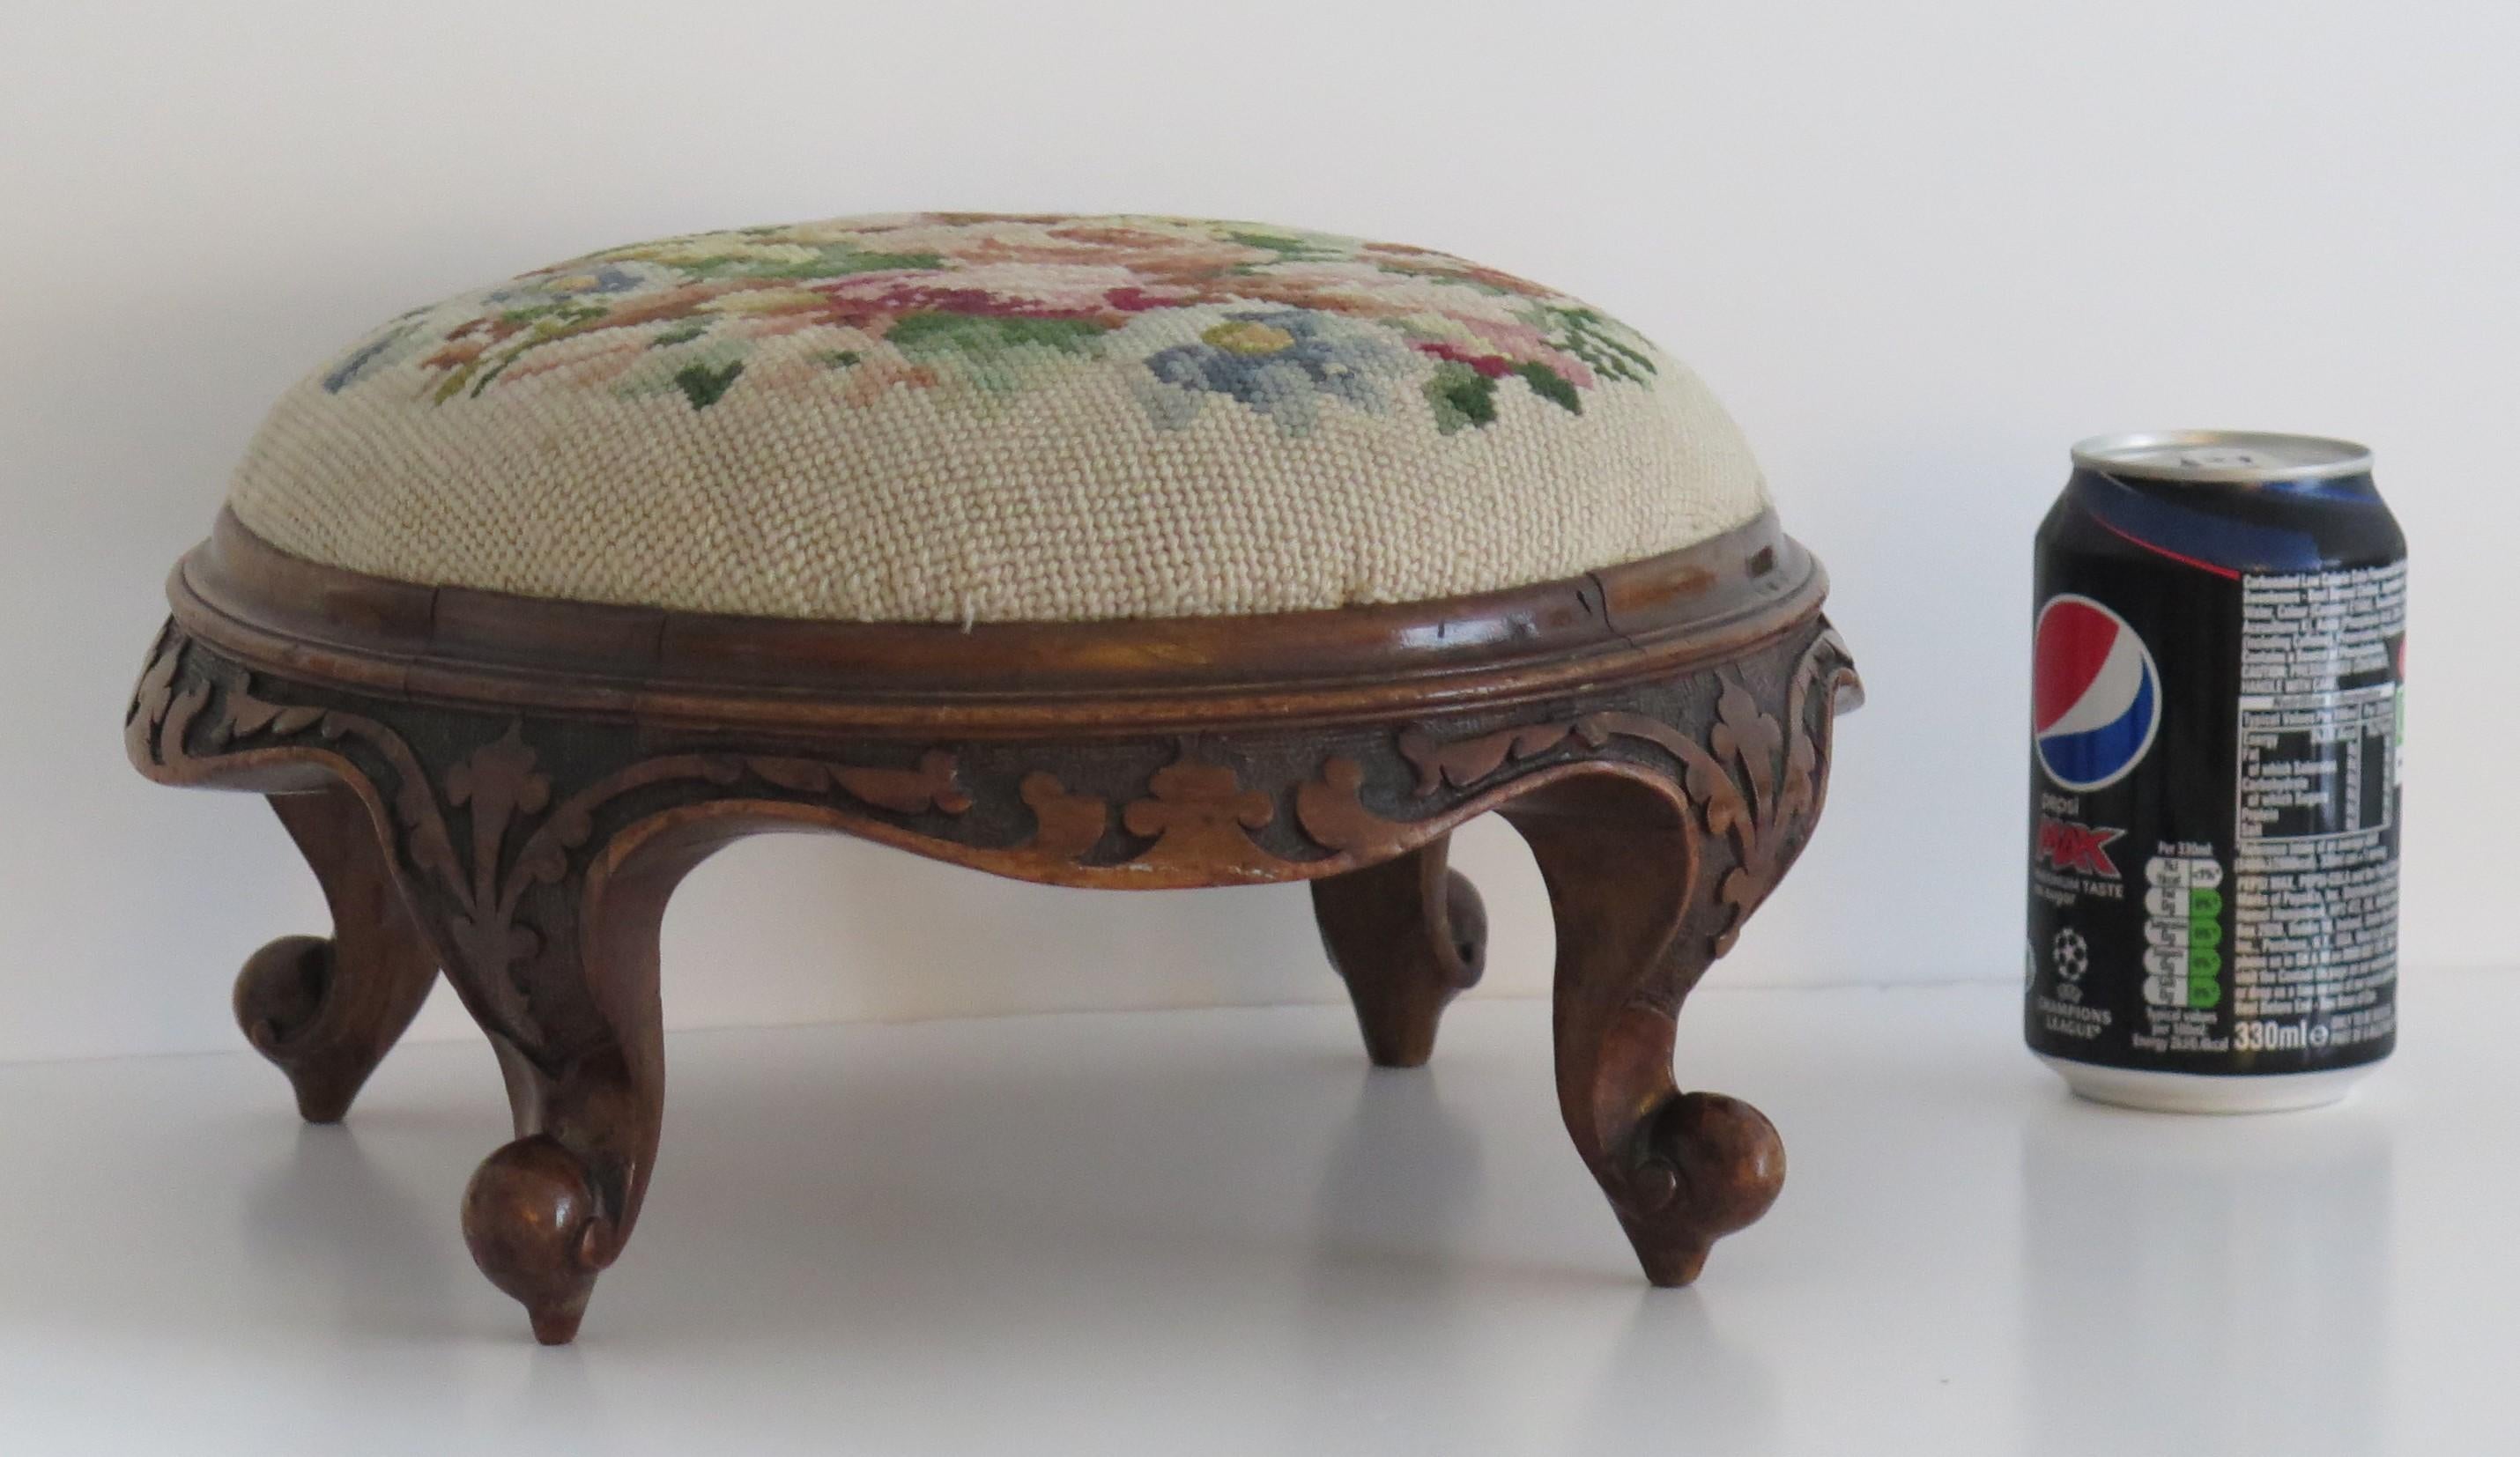 Foot Stool Early Victorian Carved Walnut with Wool-Work Top, English, Circa 1850 For Sale 5